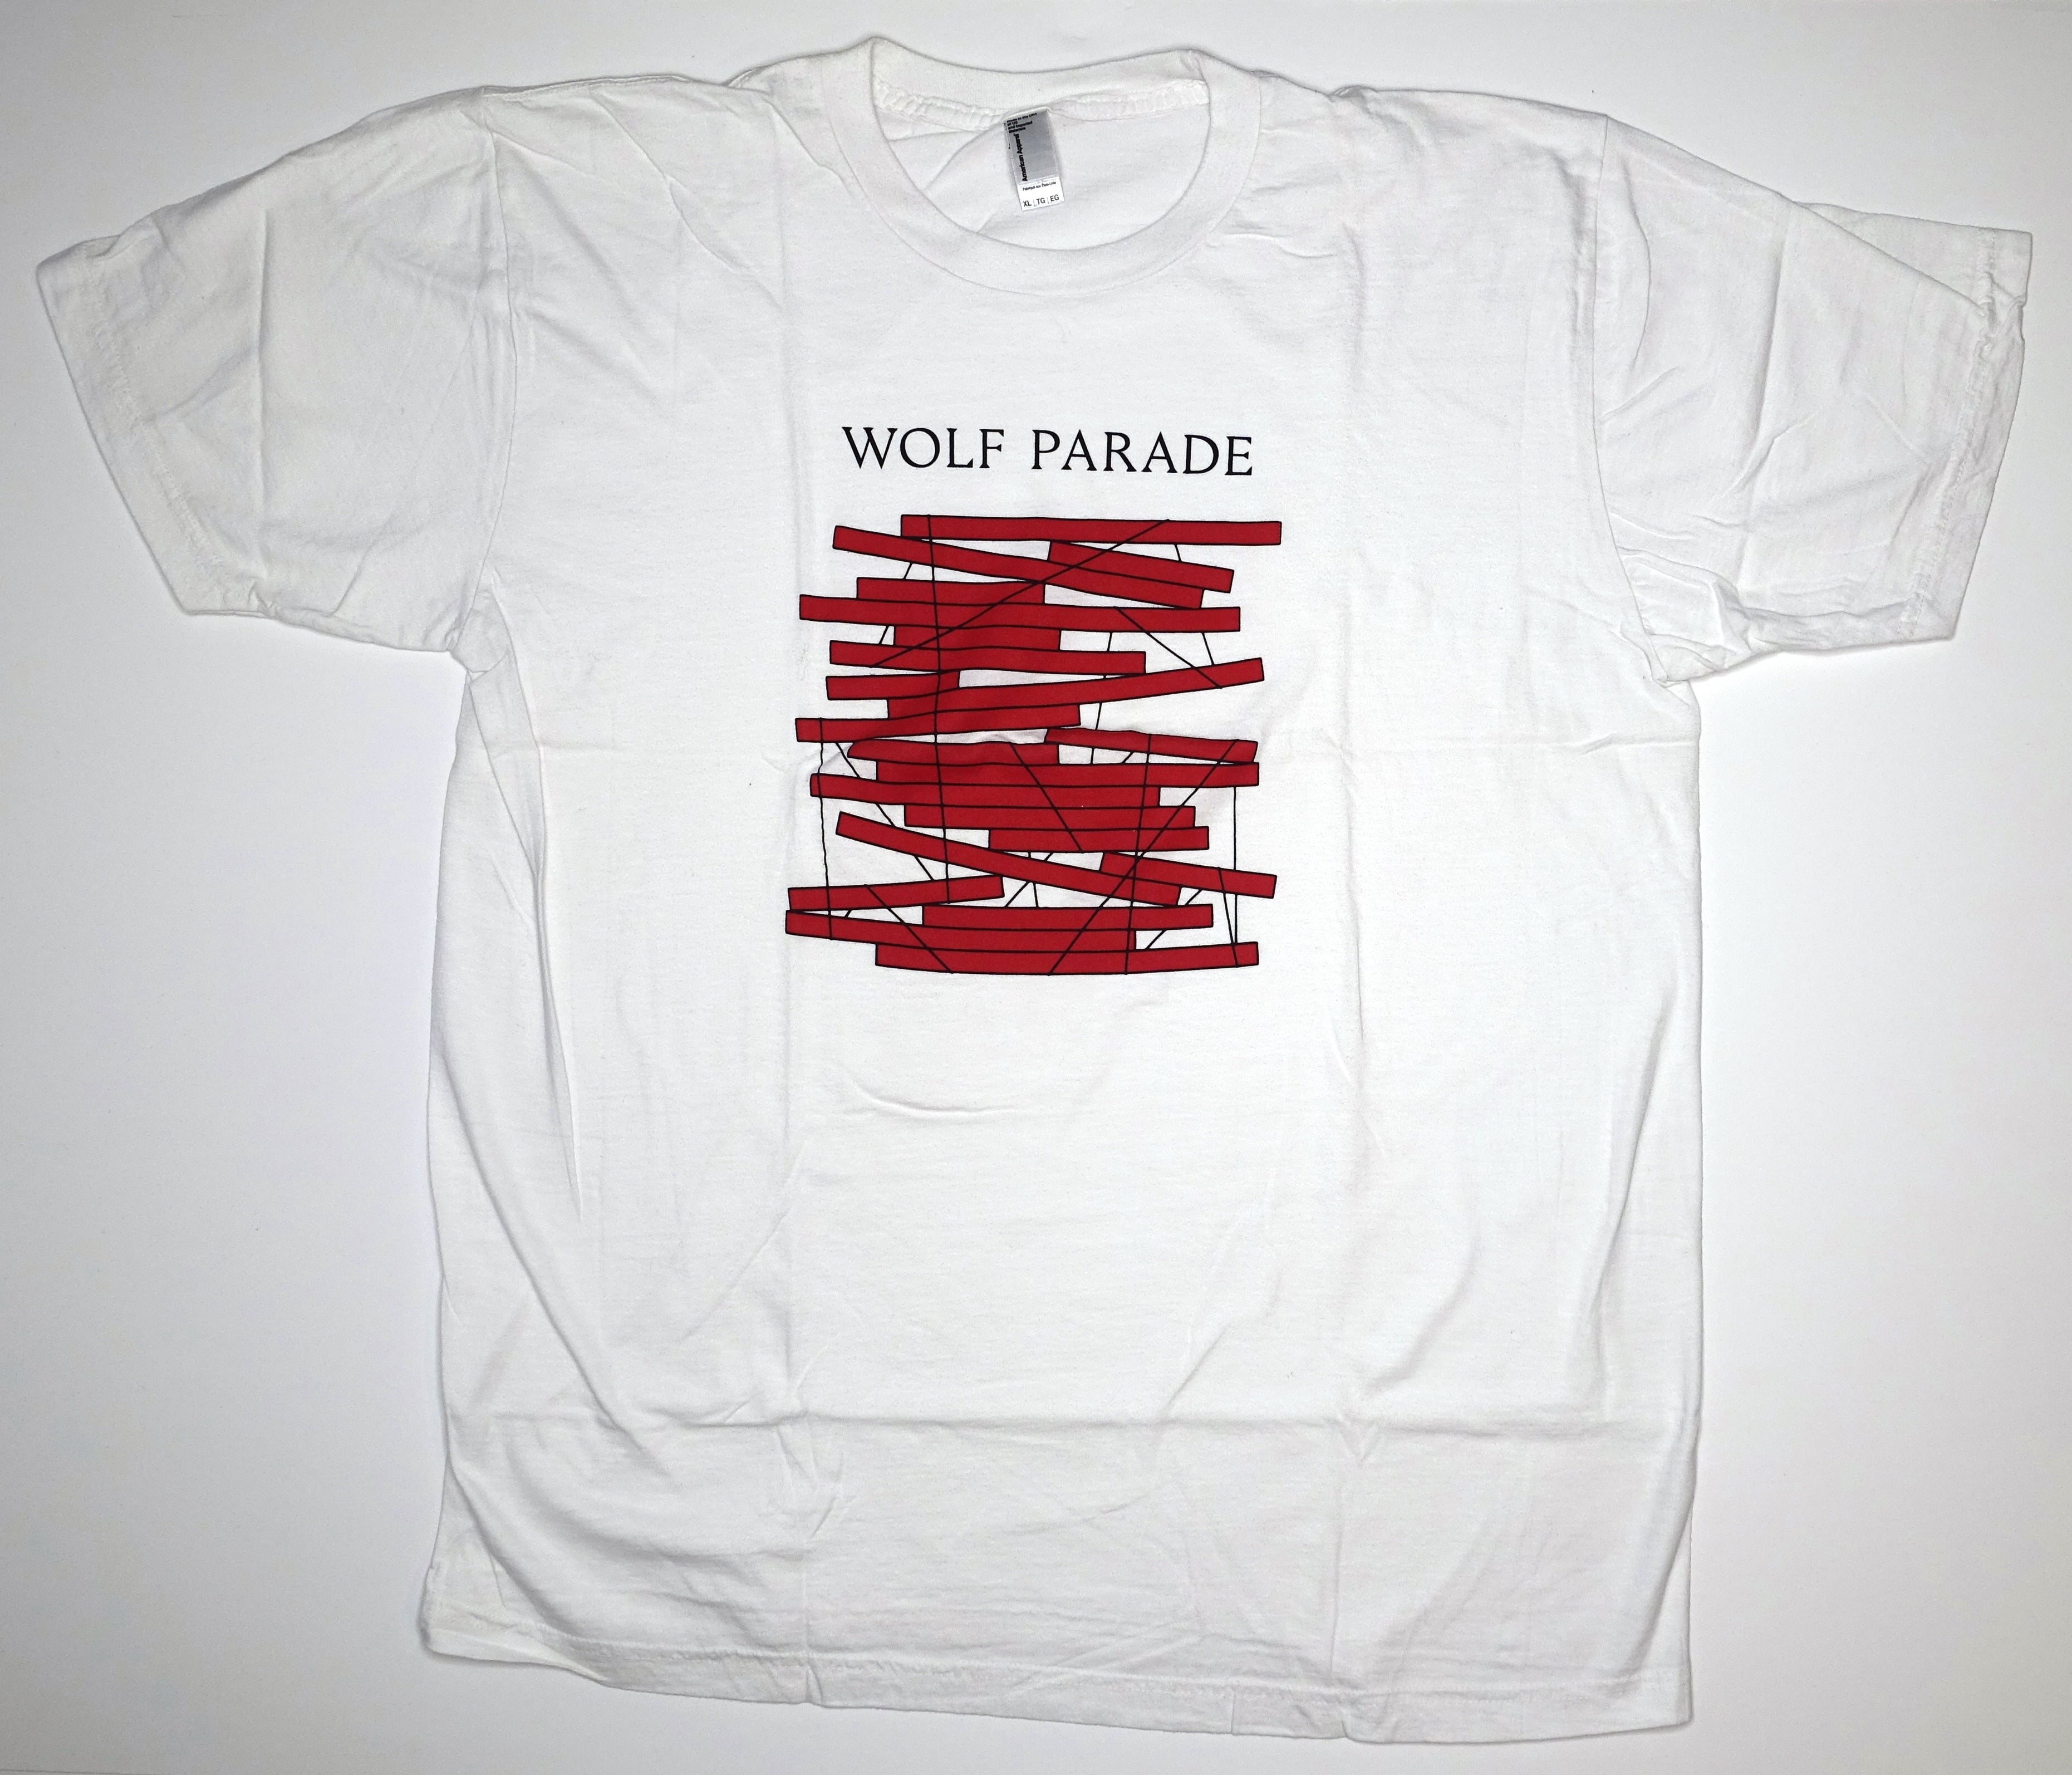 Wolf Parade - Stacked Bars 2017 Tour Shirt Size XL